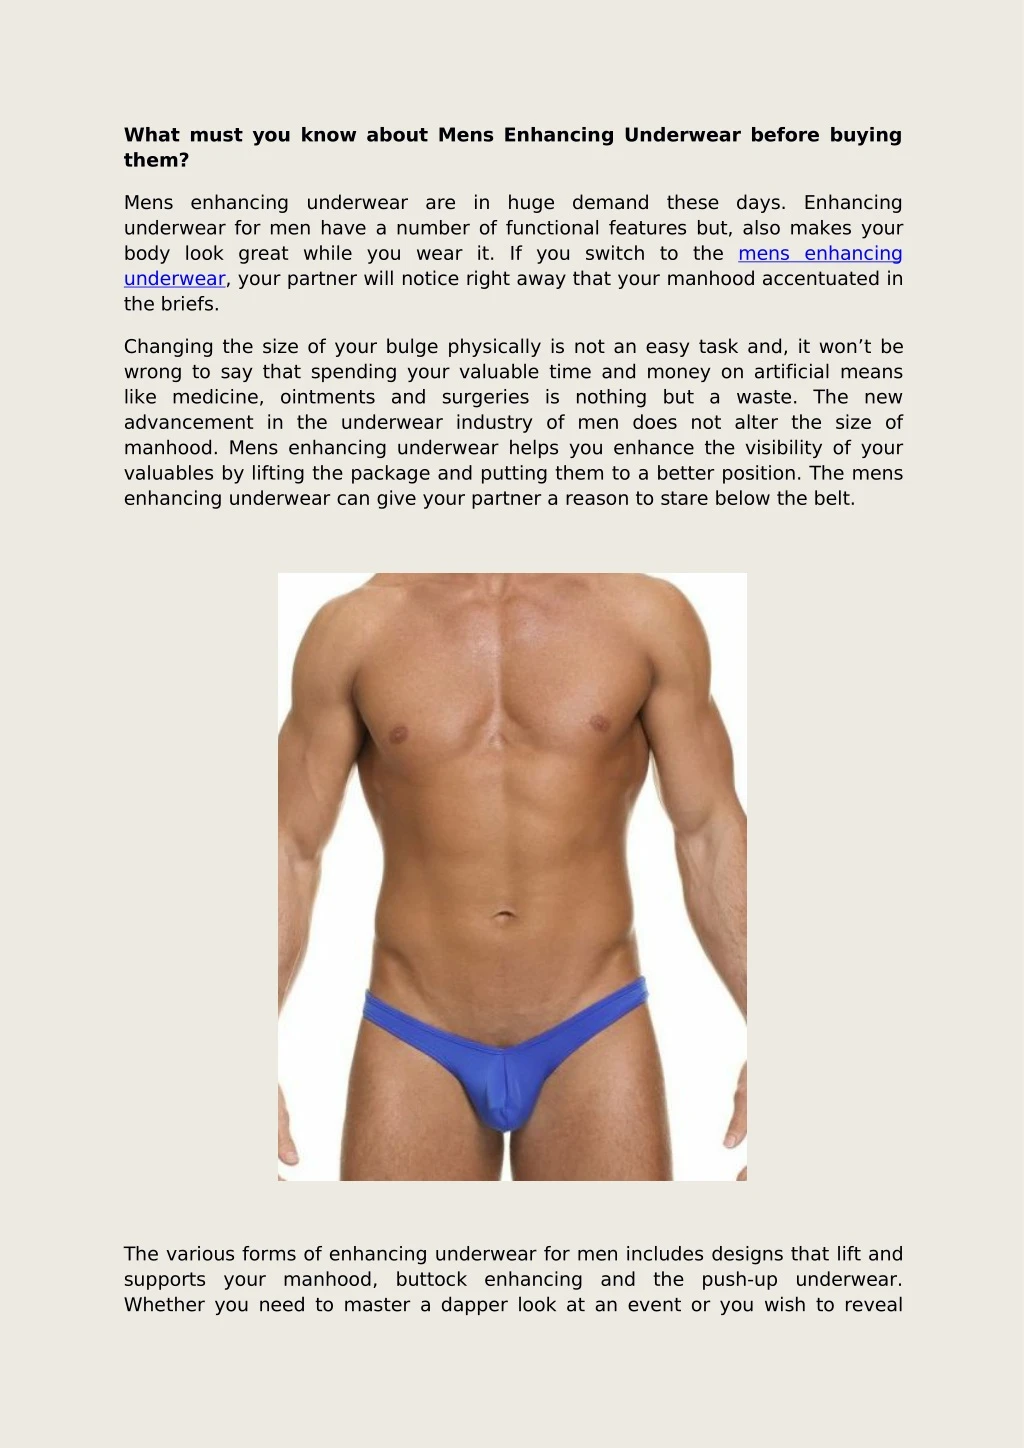 what must you know about mens enhancing underwear